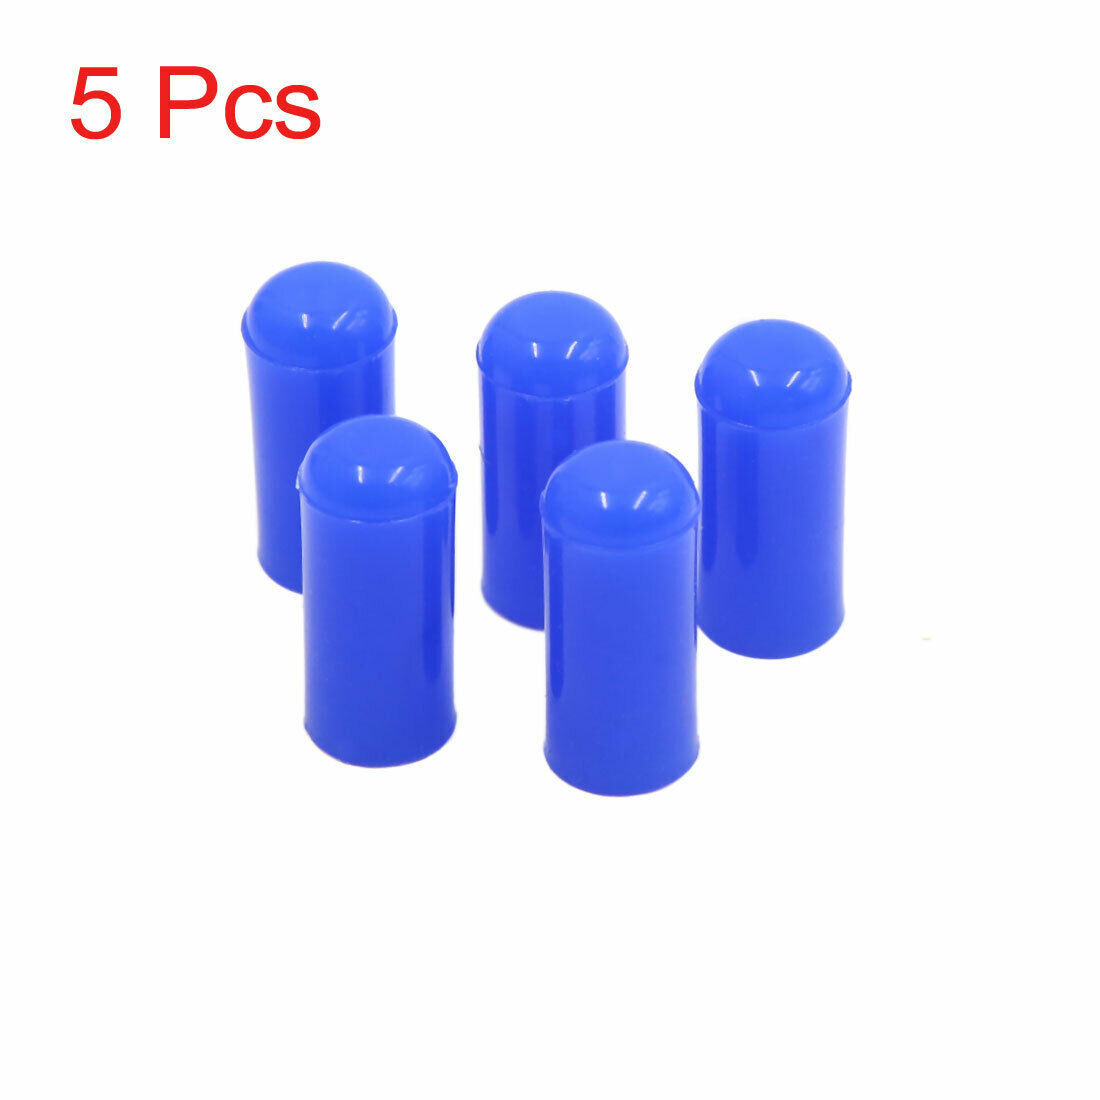  silicon cap 12mm blue 5 piece set other size stock equipped silicon mekla cover cover intake vacuum air cap heat-resisting blue 